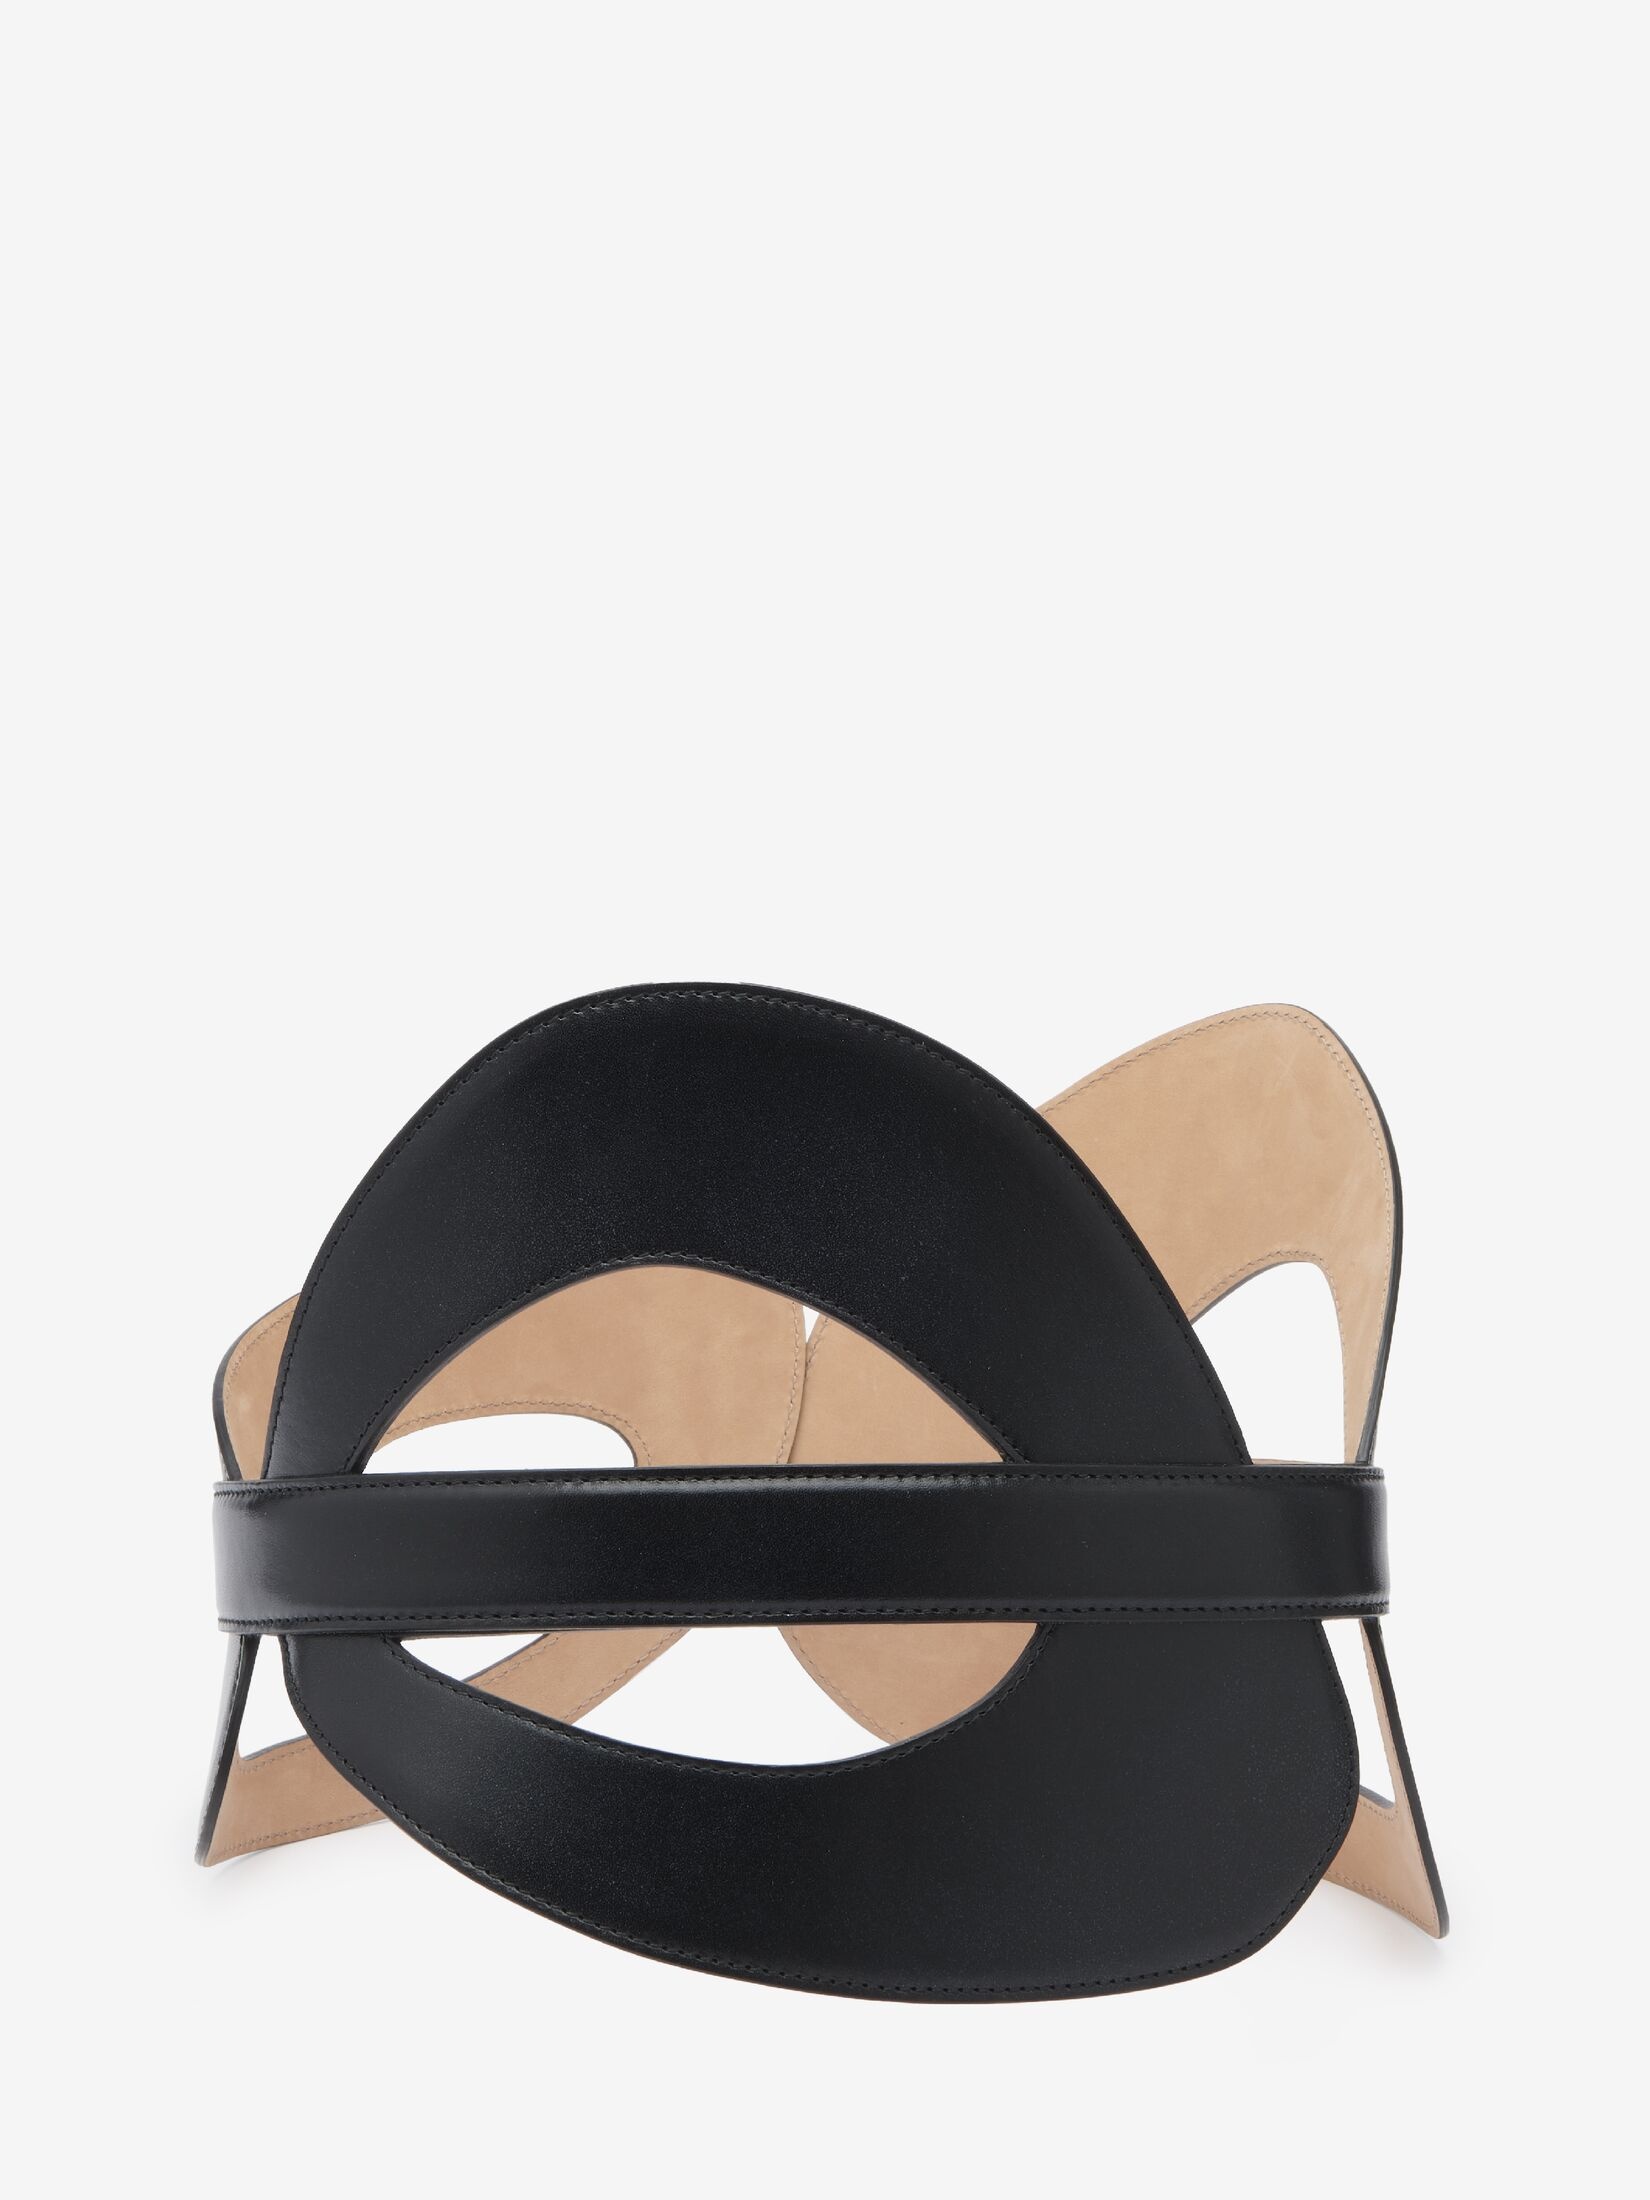 Women's The Curved Belt in Black - 2